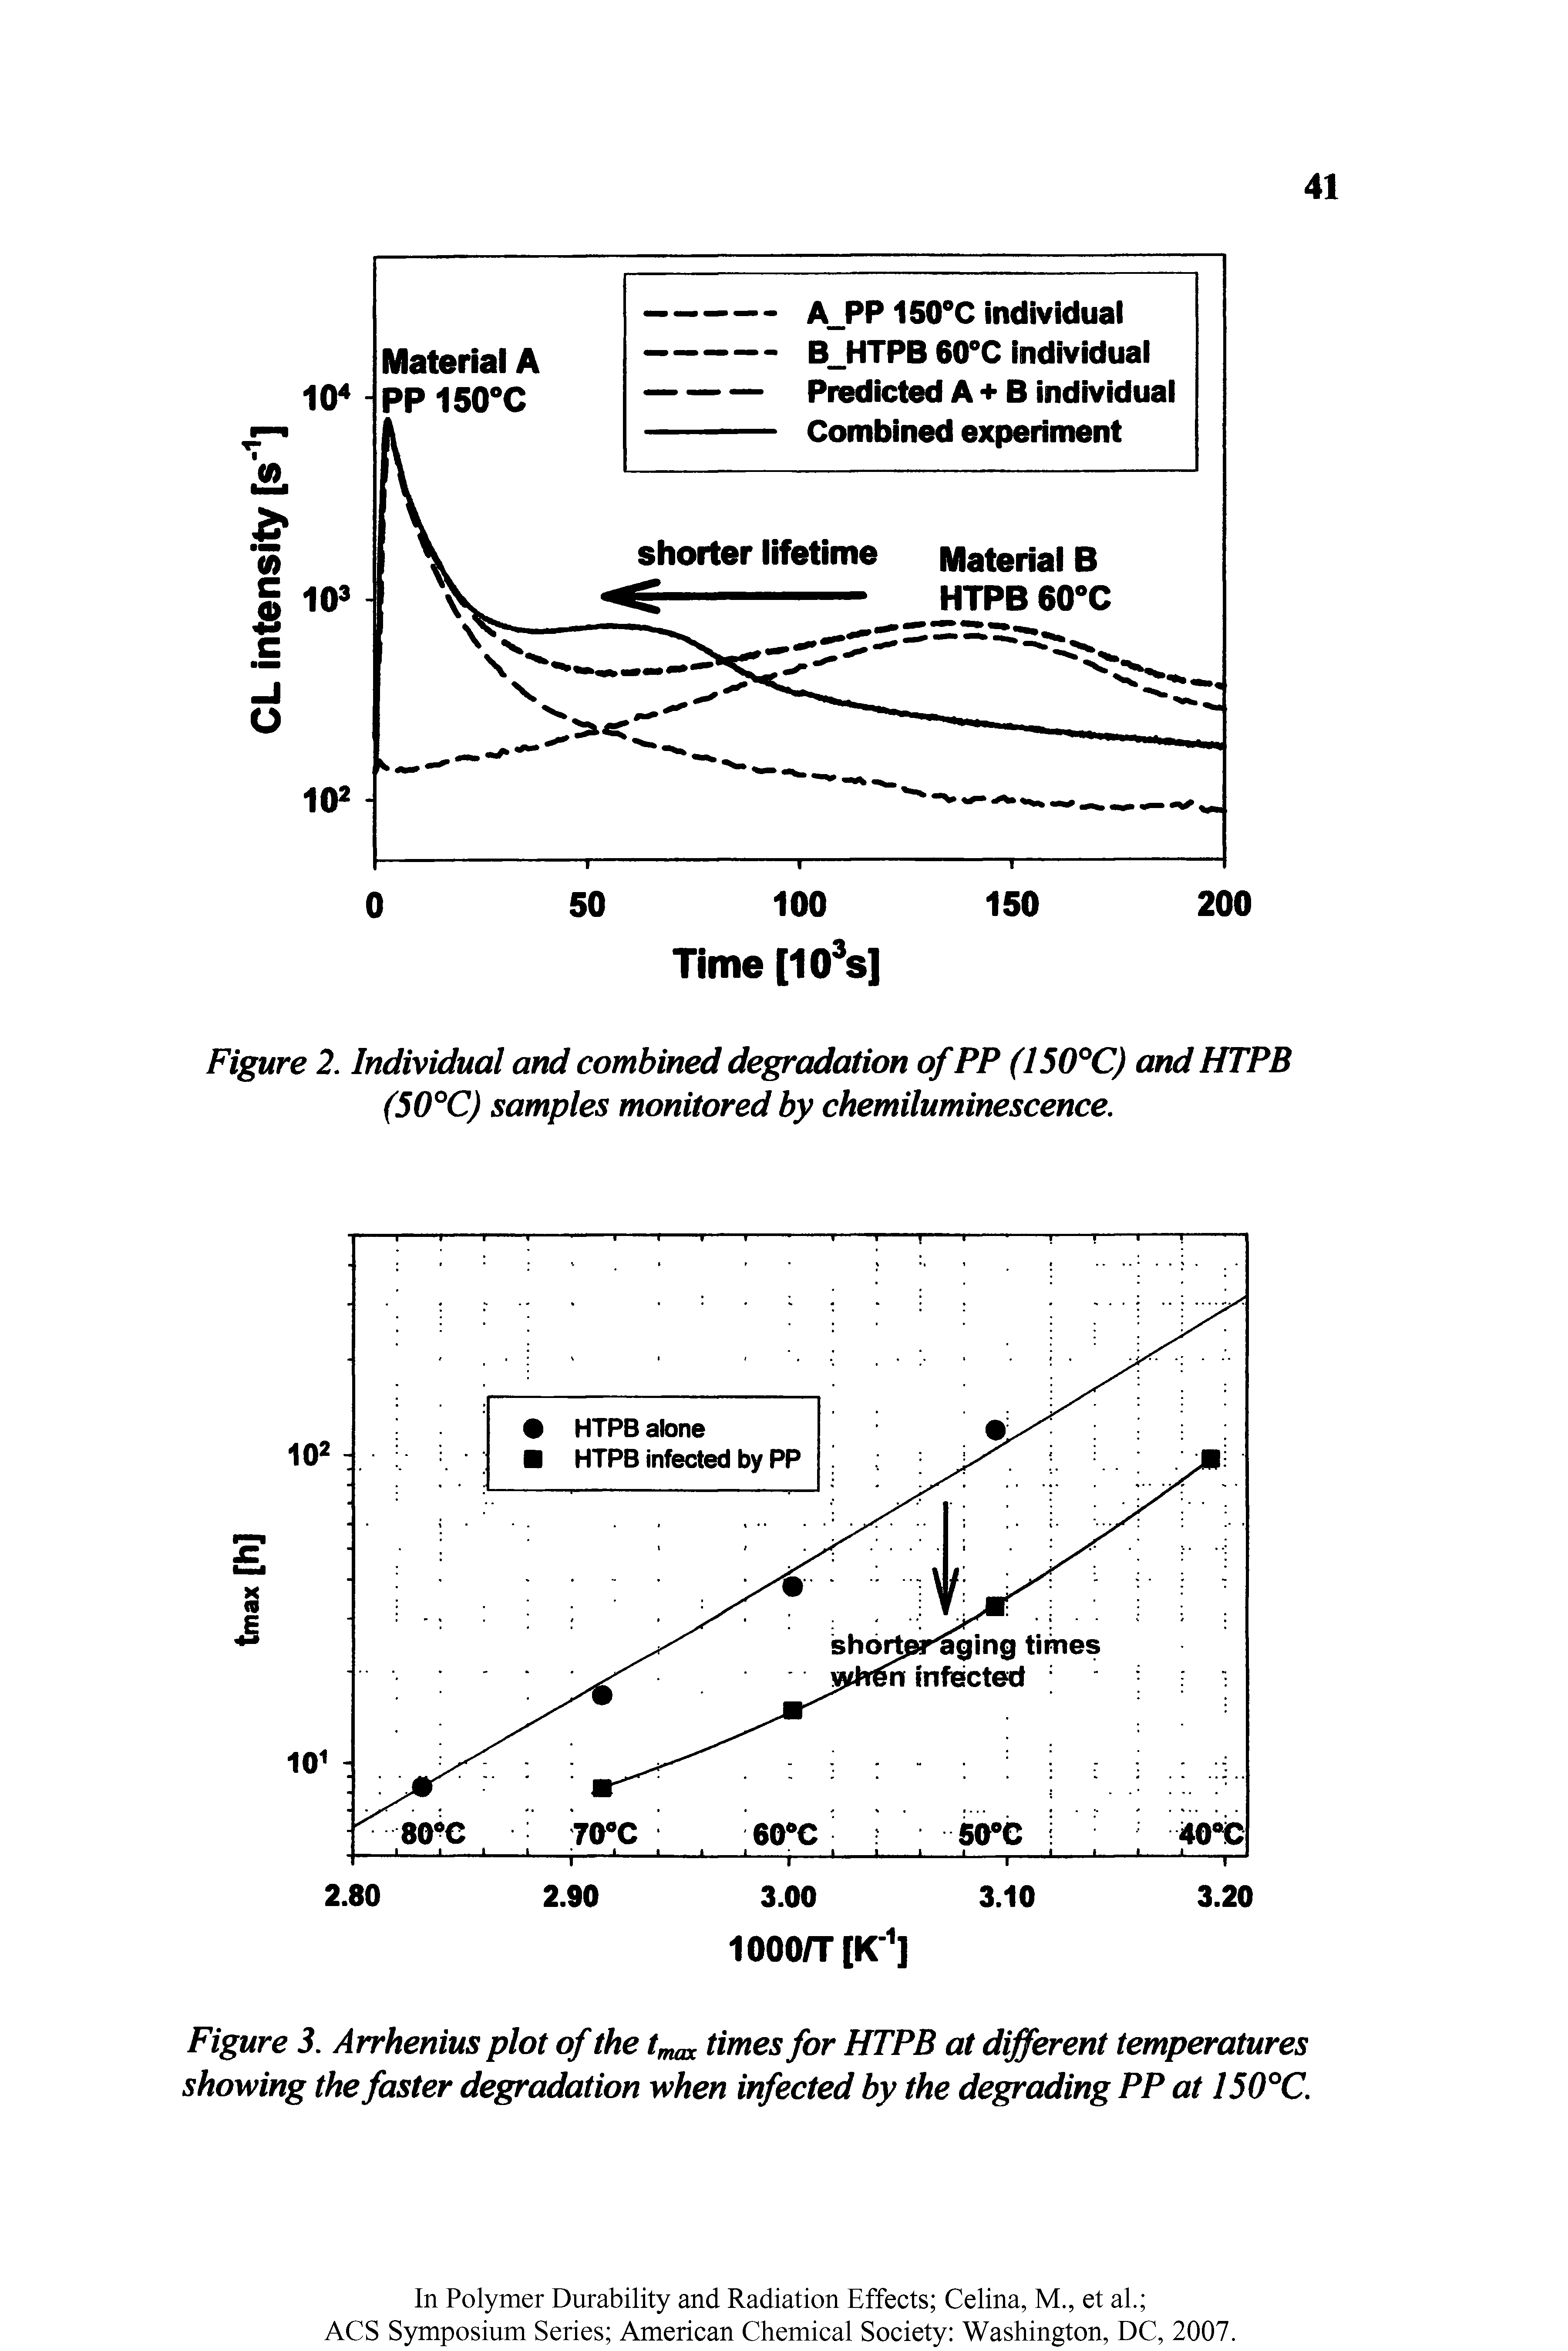 Figure 2. Individual and combined degradation of PP (150°C) and HTPB (50°C) samples monitored by chemiluminescence.